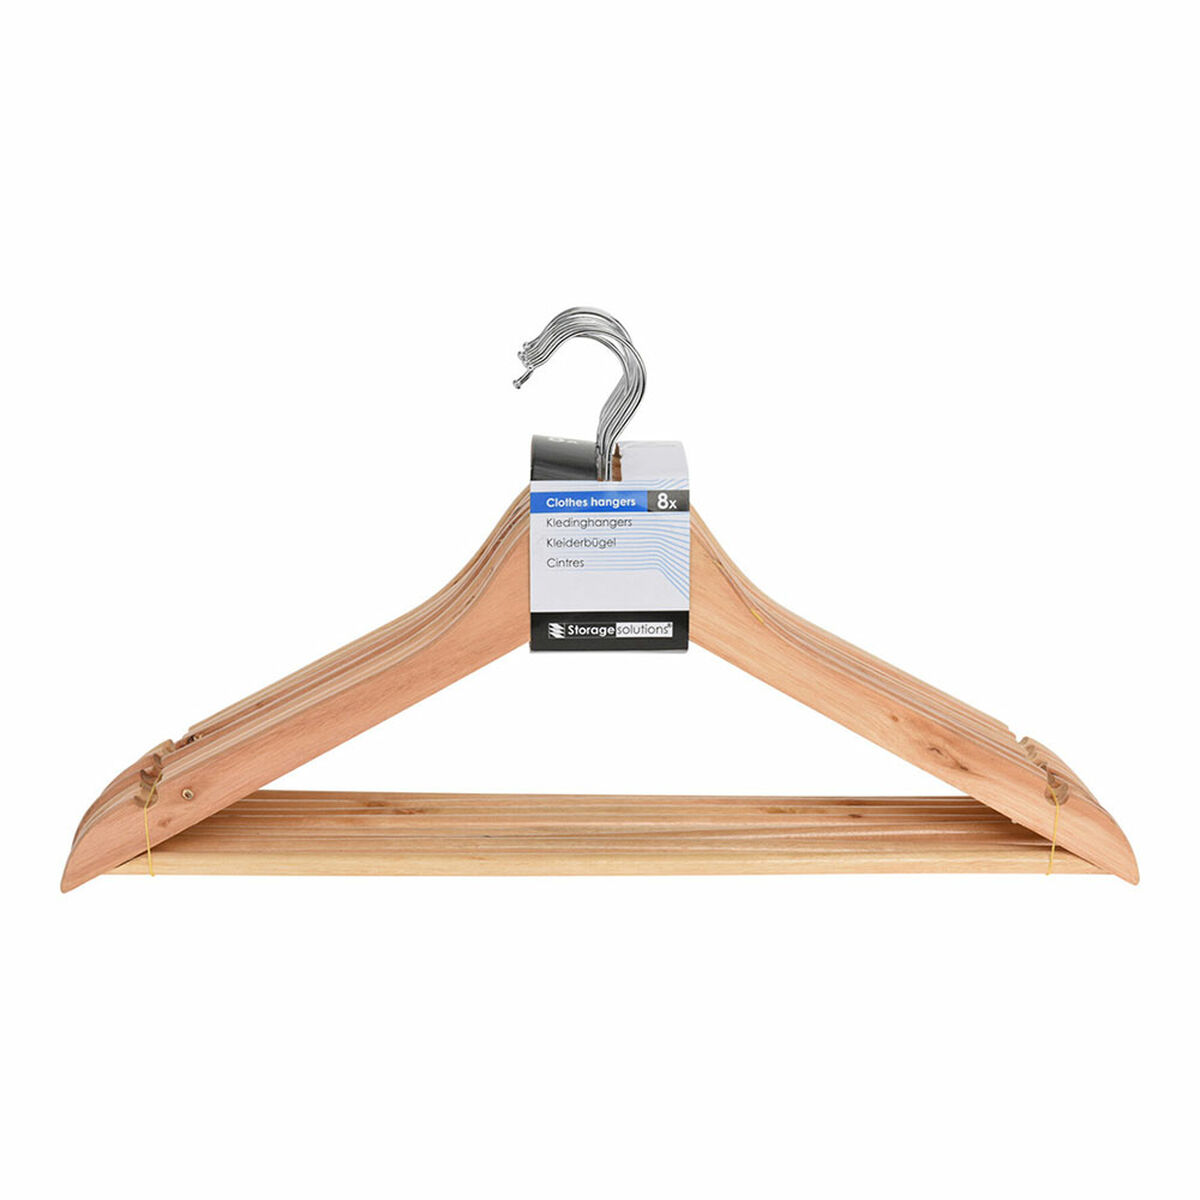 Set of Clothes Hangers Storage Solutions kh1000030 Wood (8 Units)